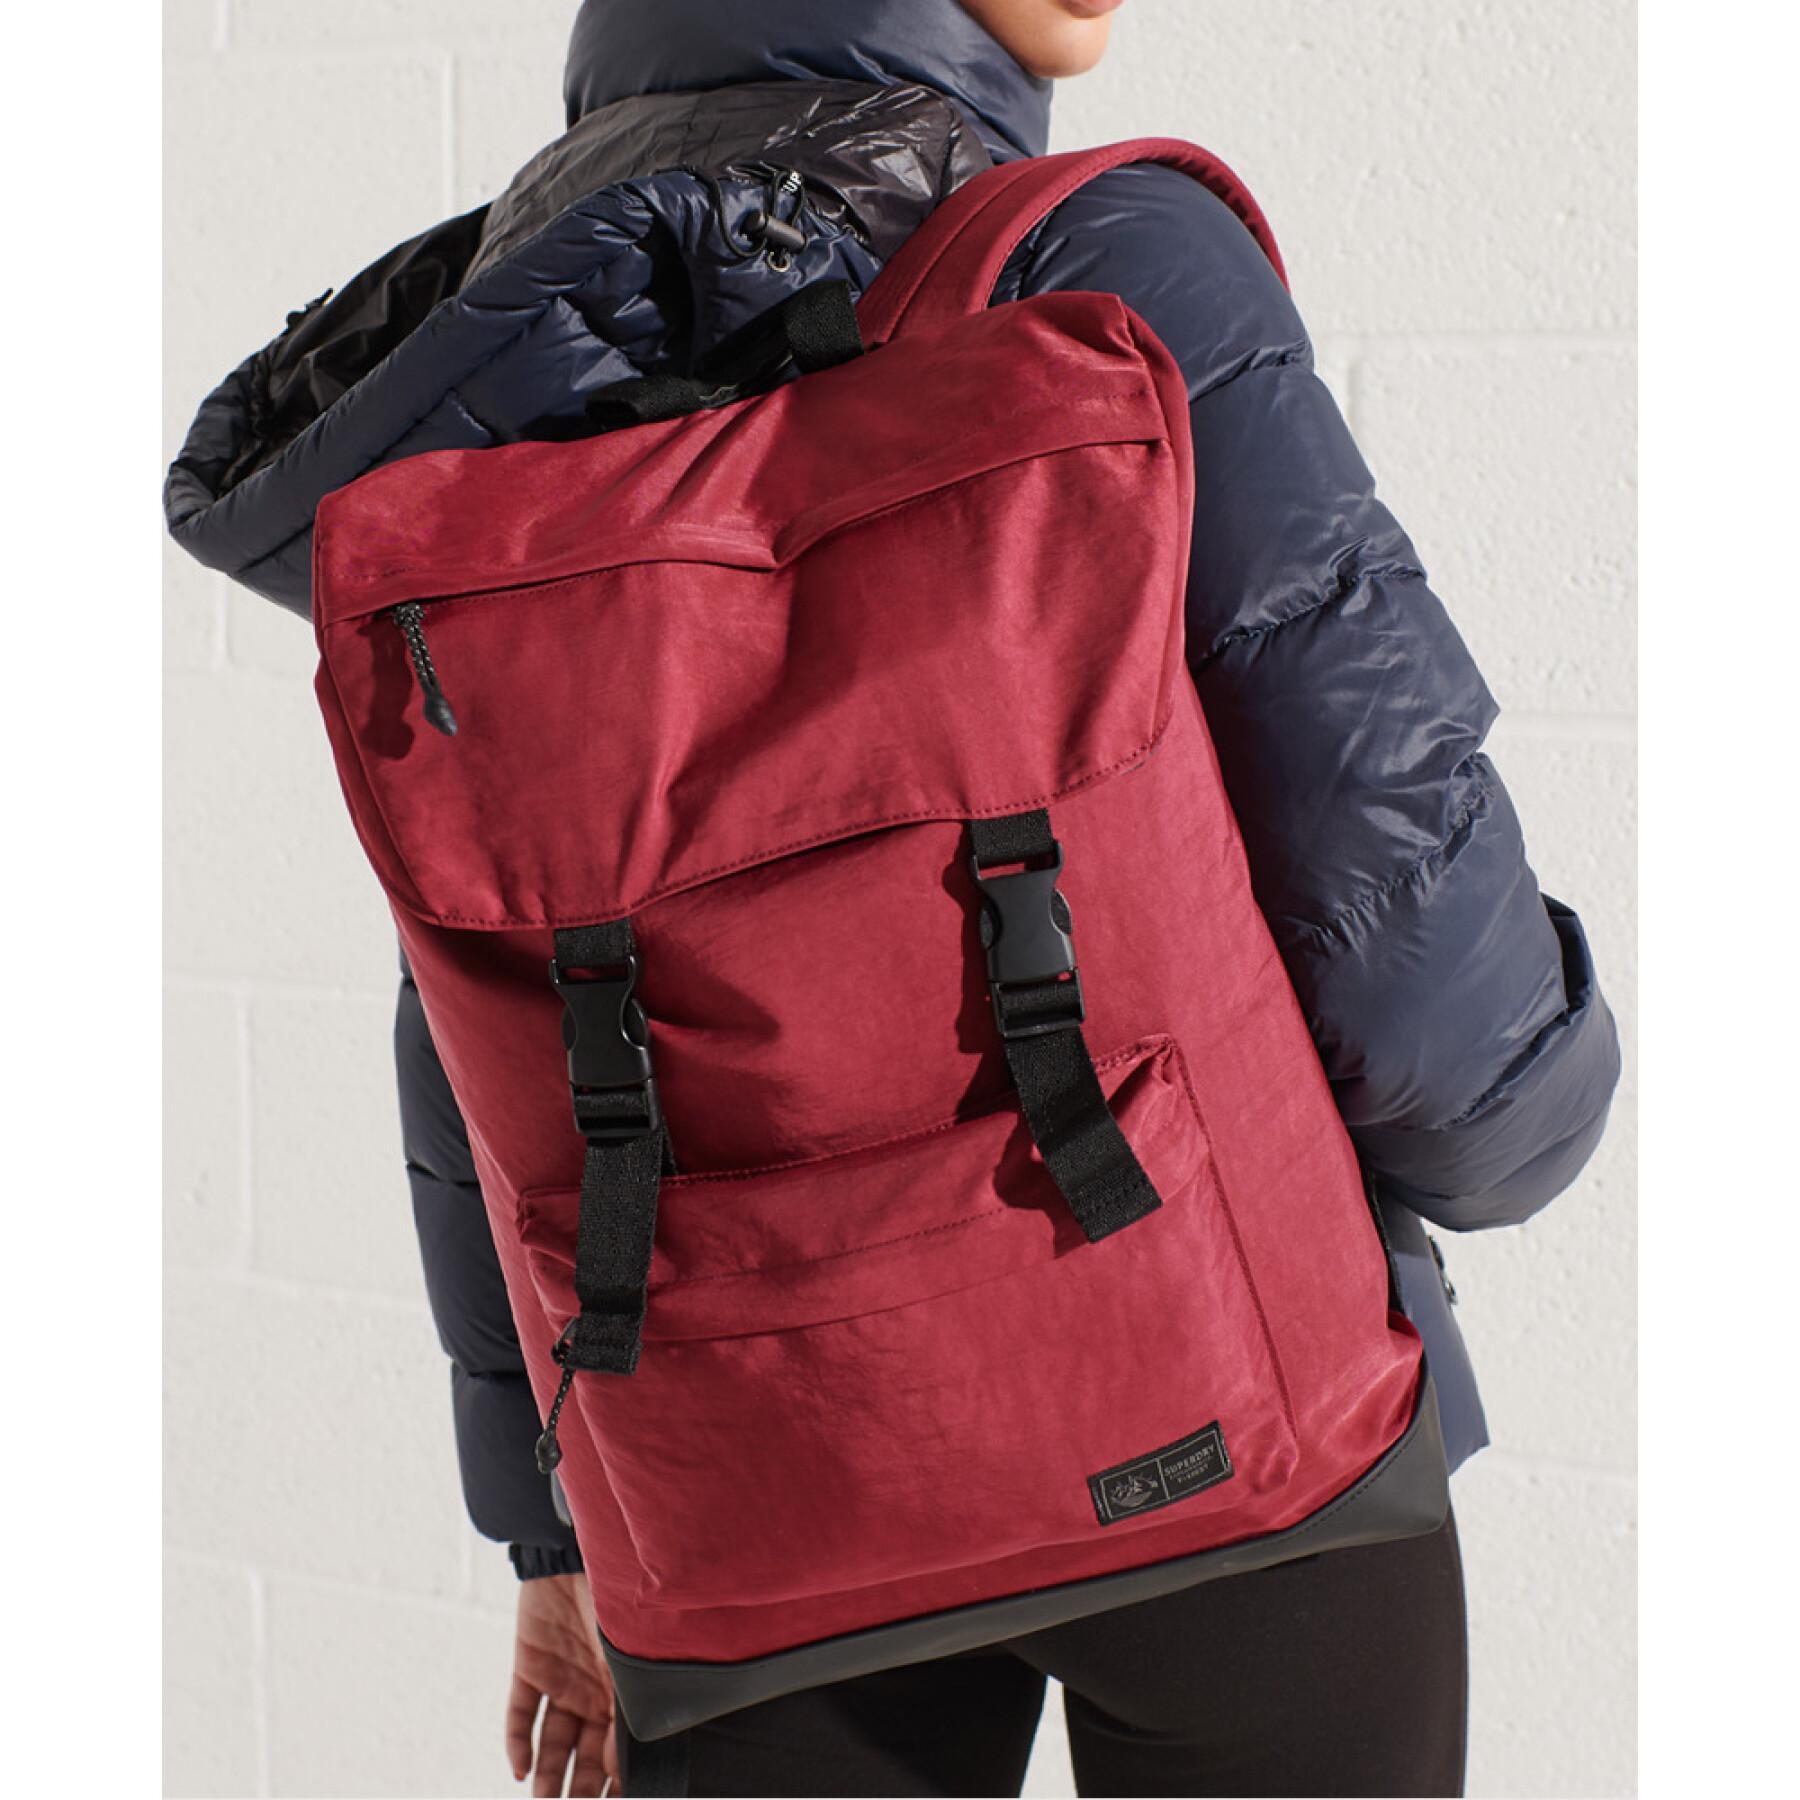 Zaino Superdry Expedition Toploader